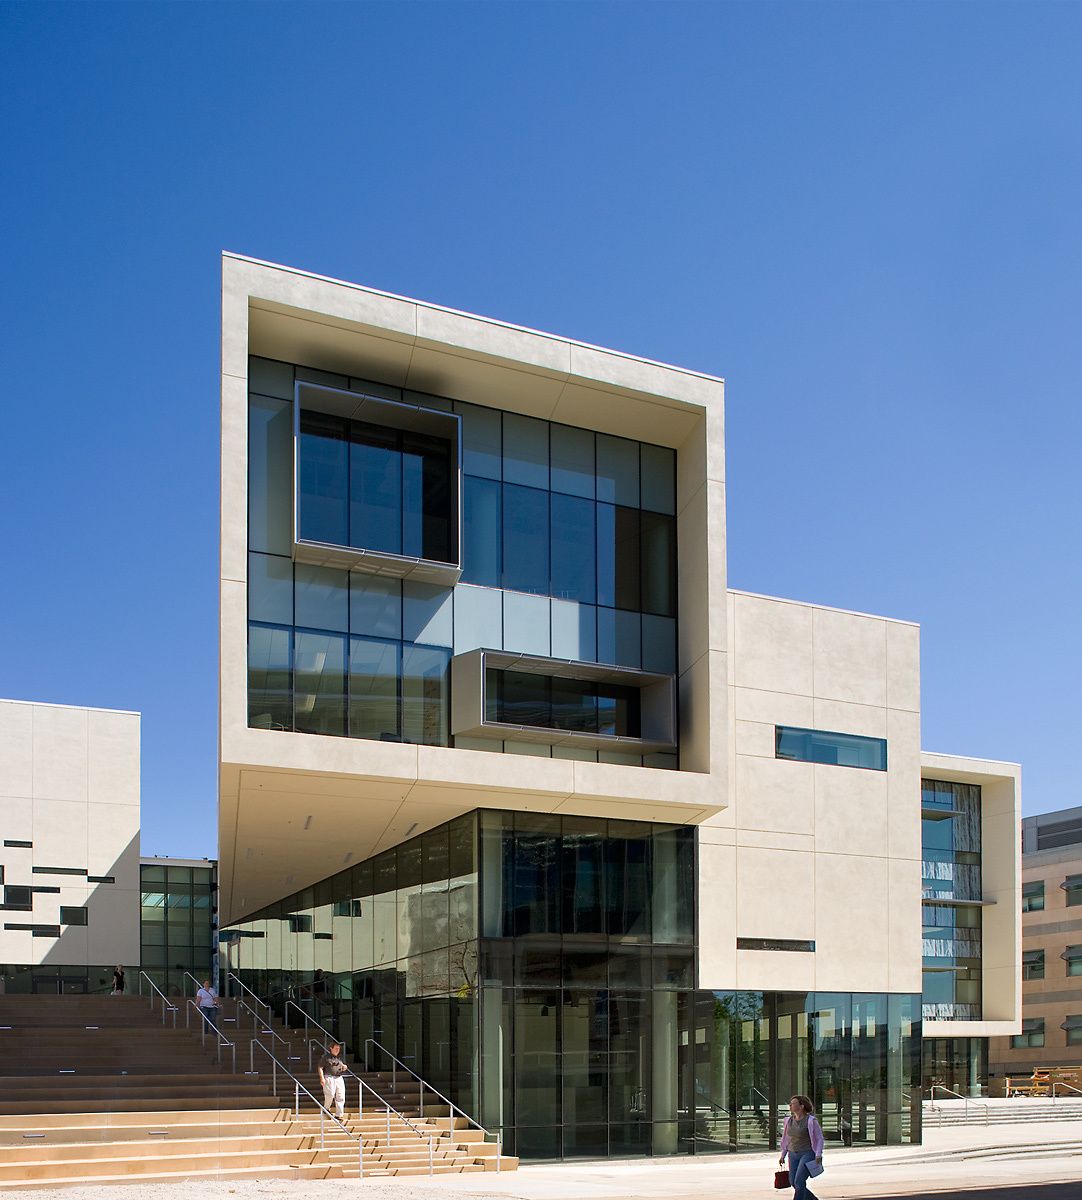 Project: University of California San Diego, Price Center EastClient: Cannon Design & UCSD Facilities Design & Construction